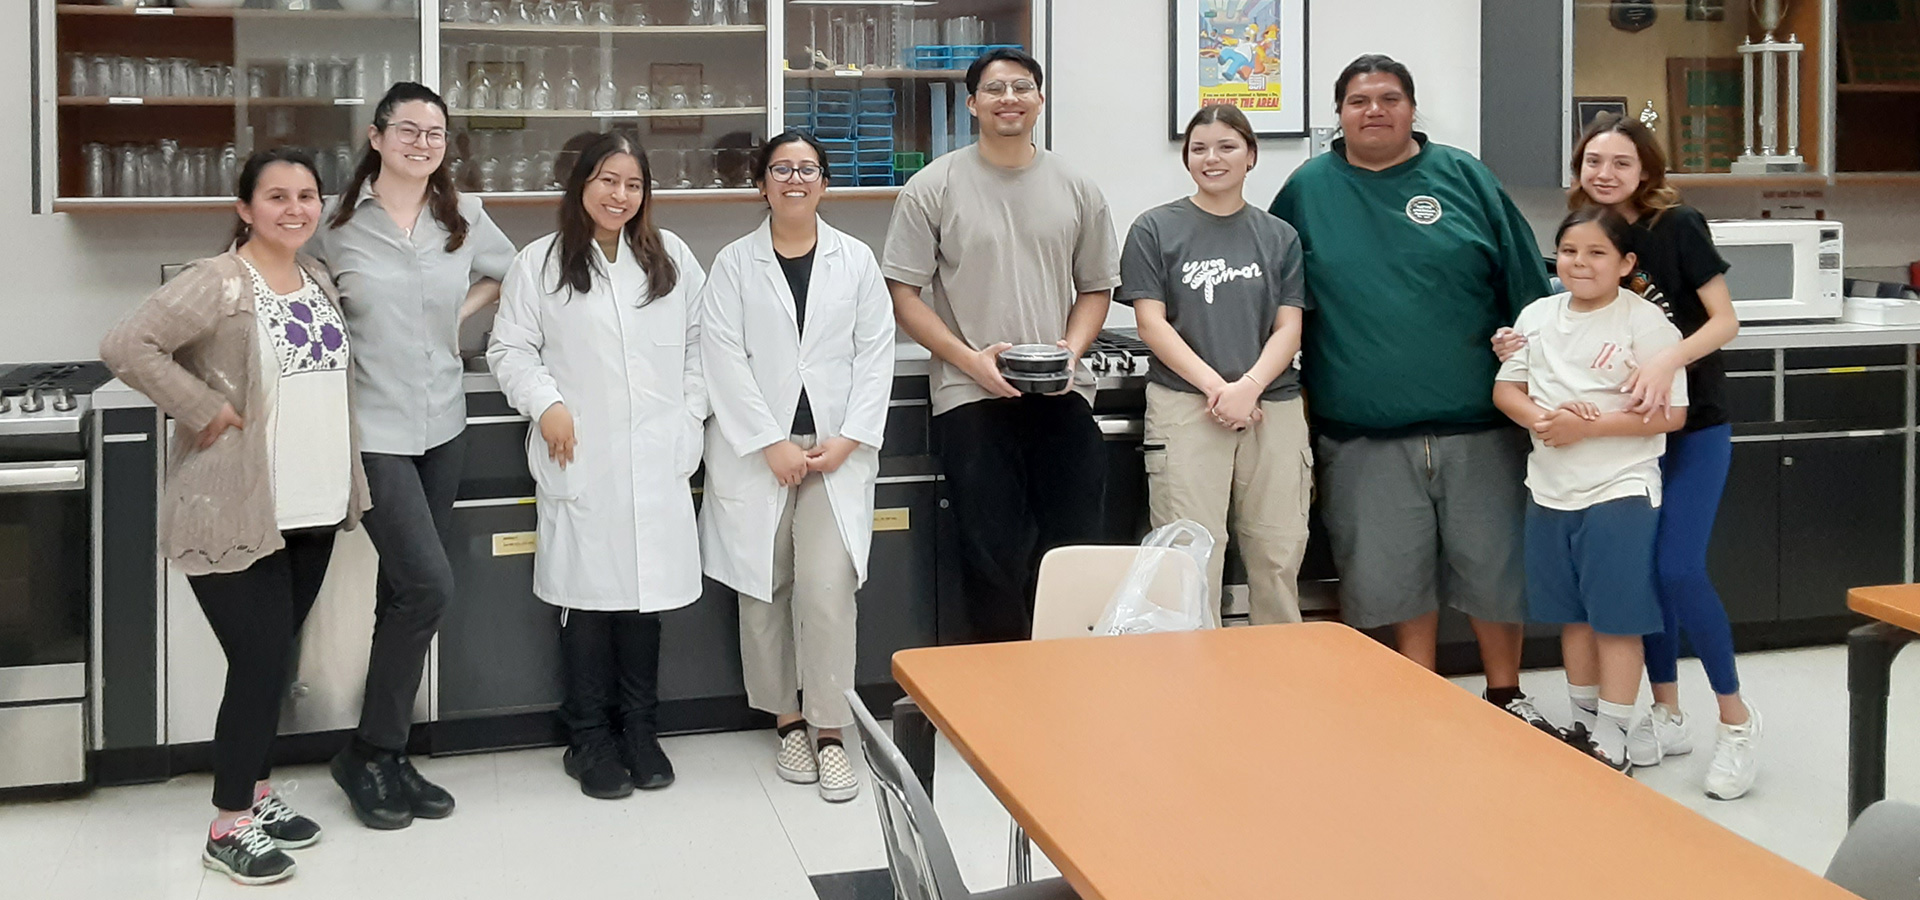 A group of students and family or community members in one of the labs